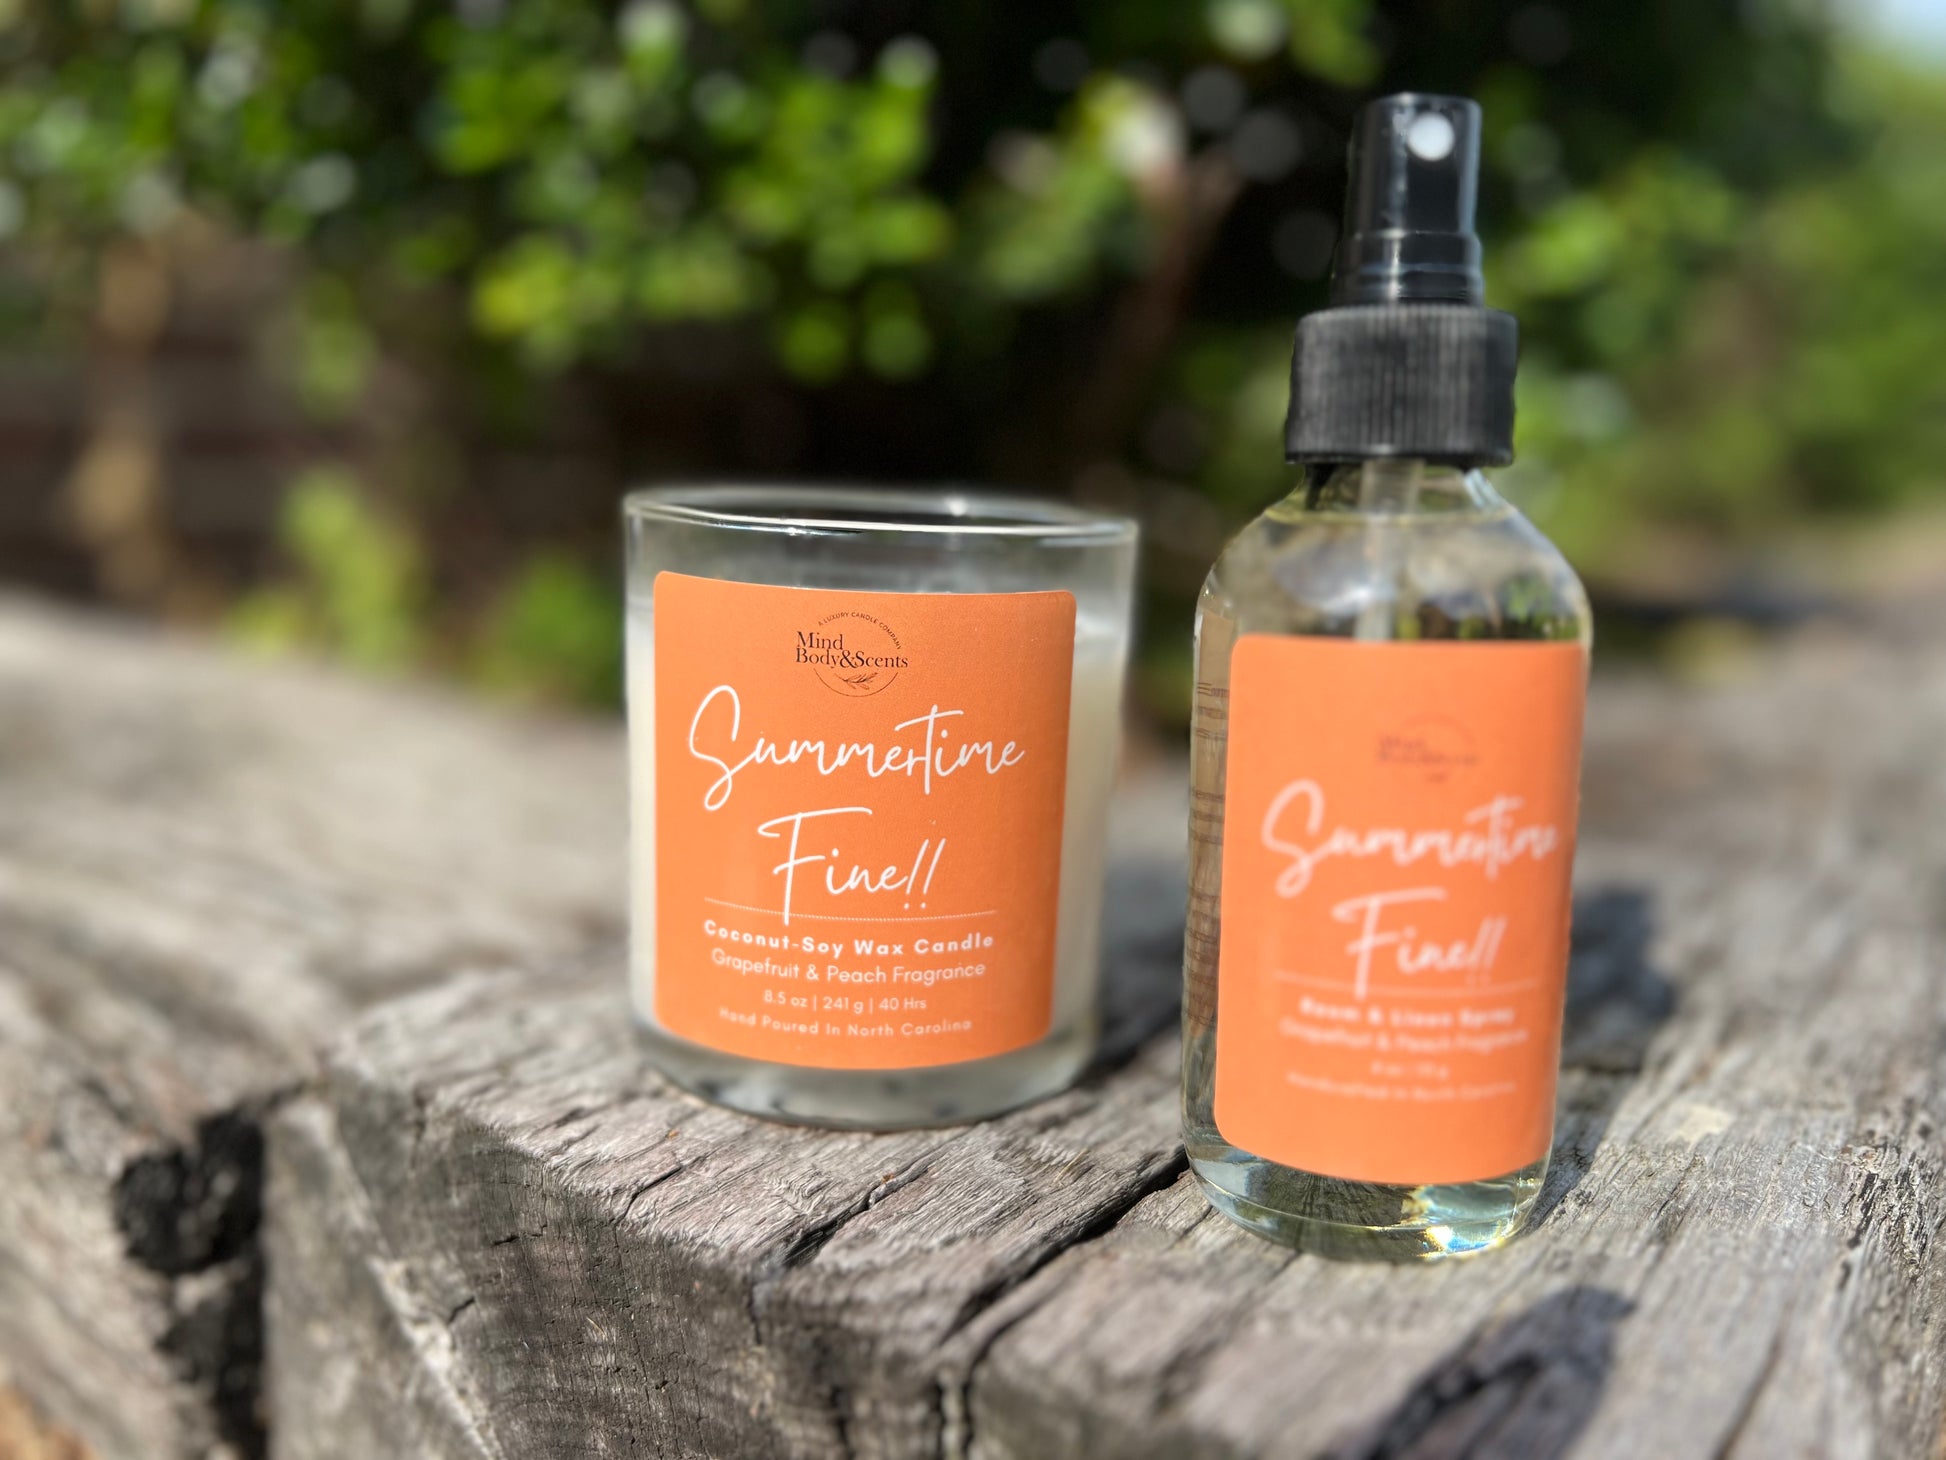 Summertime Fine !! | 8.5oz Candle - Mind Body & Scents, LLC